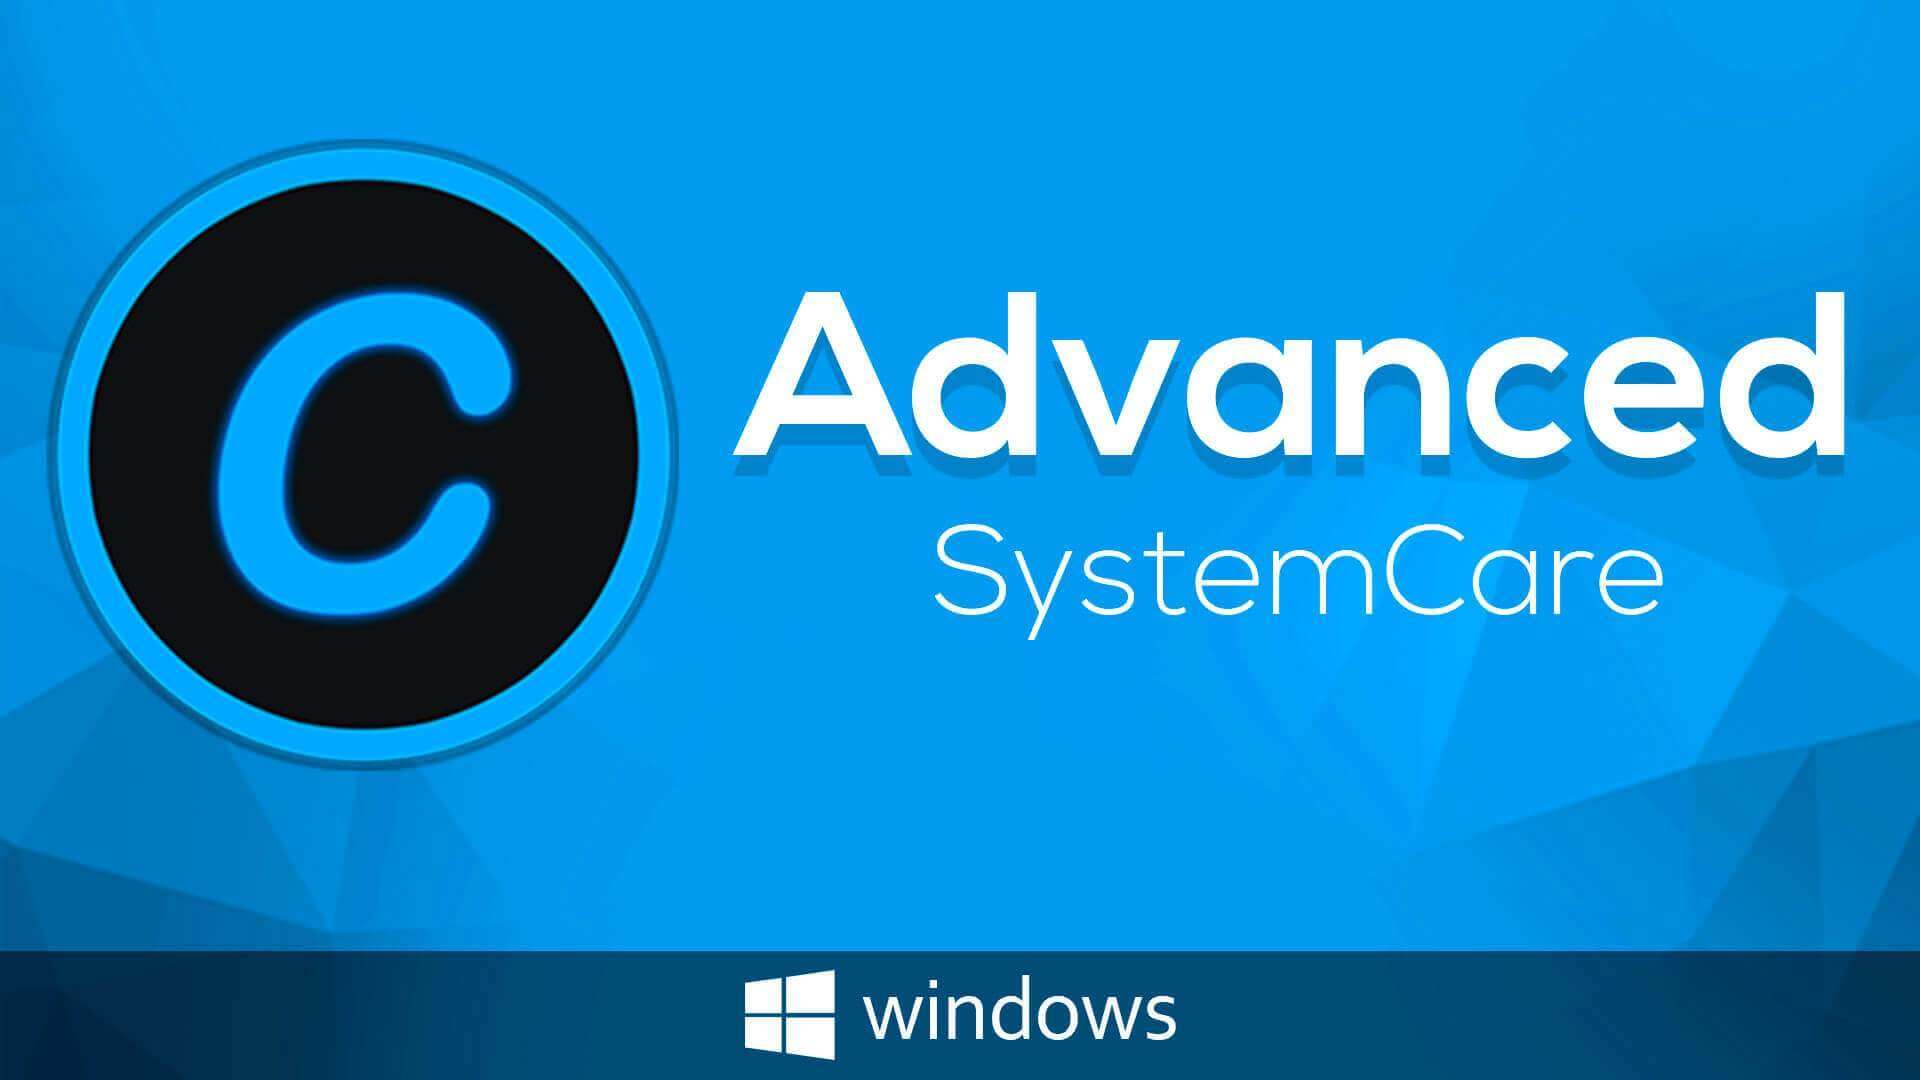 Advanced SystemCare Pro 15.0.1.155 Free Download